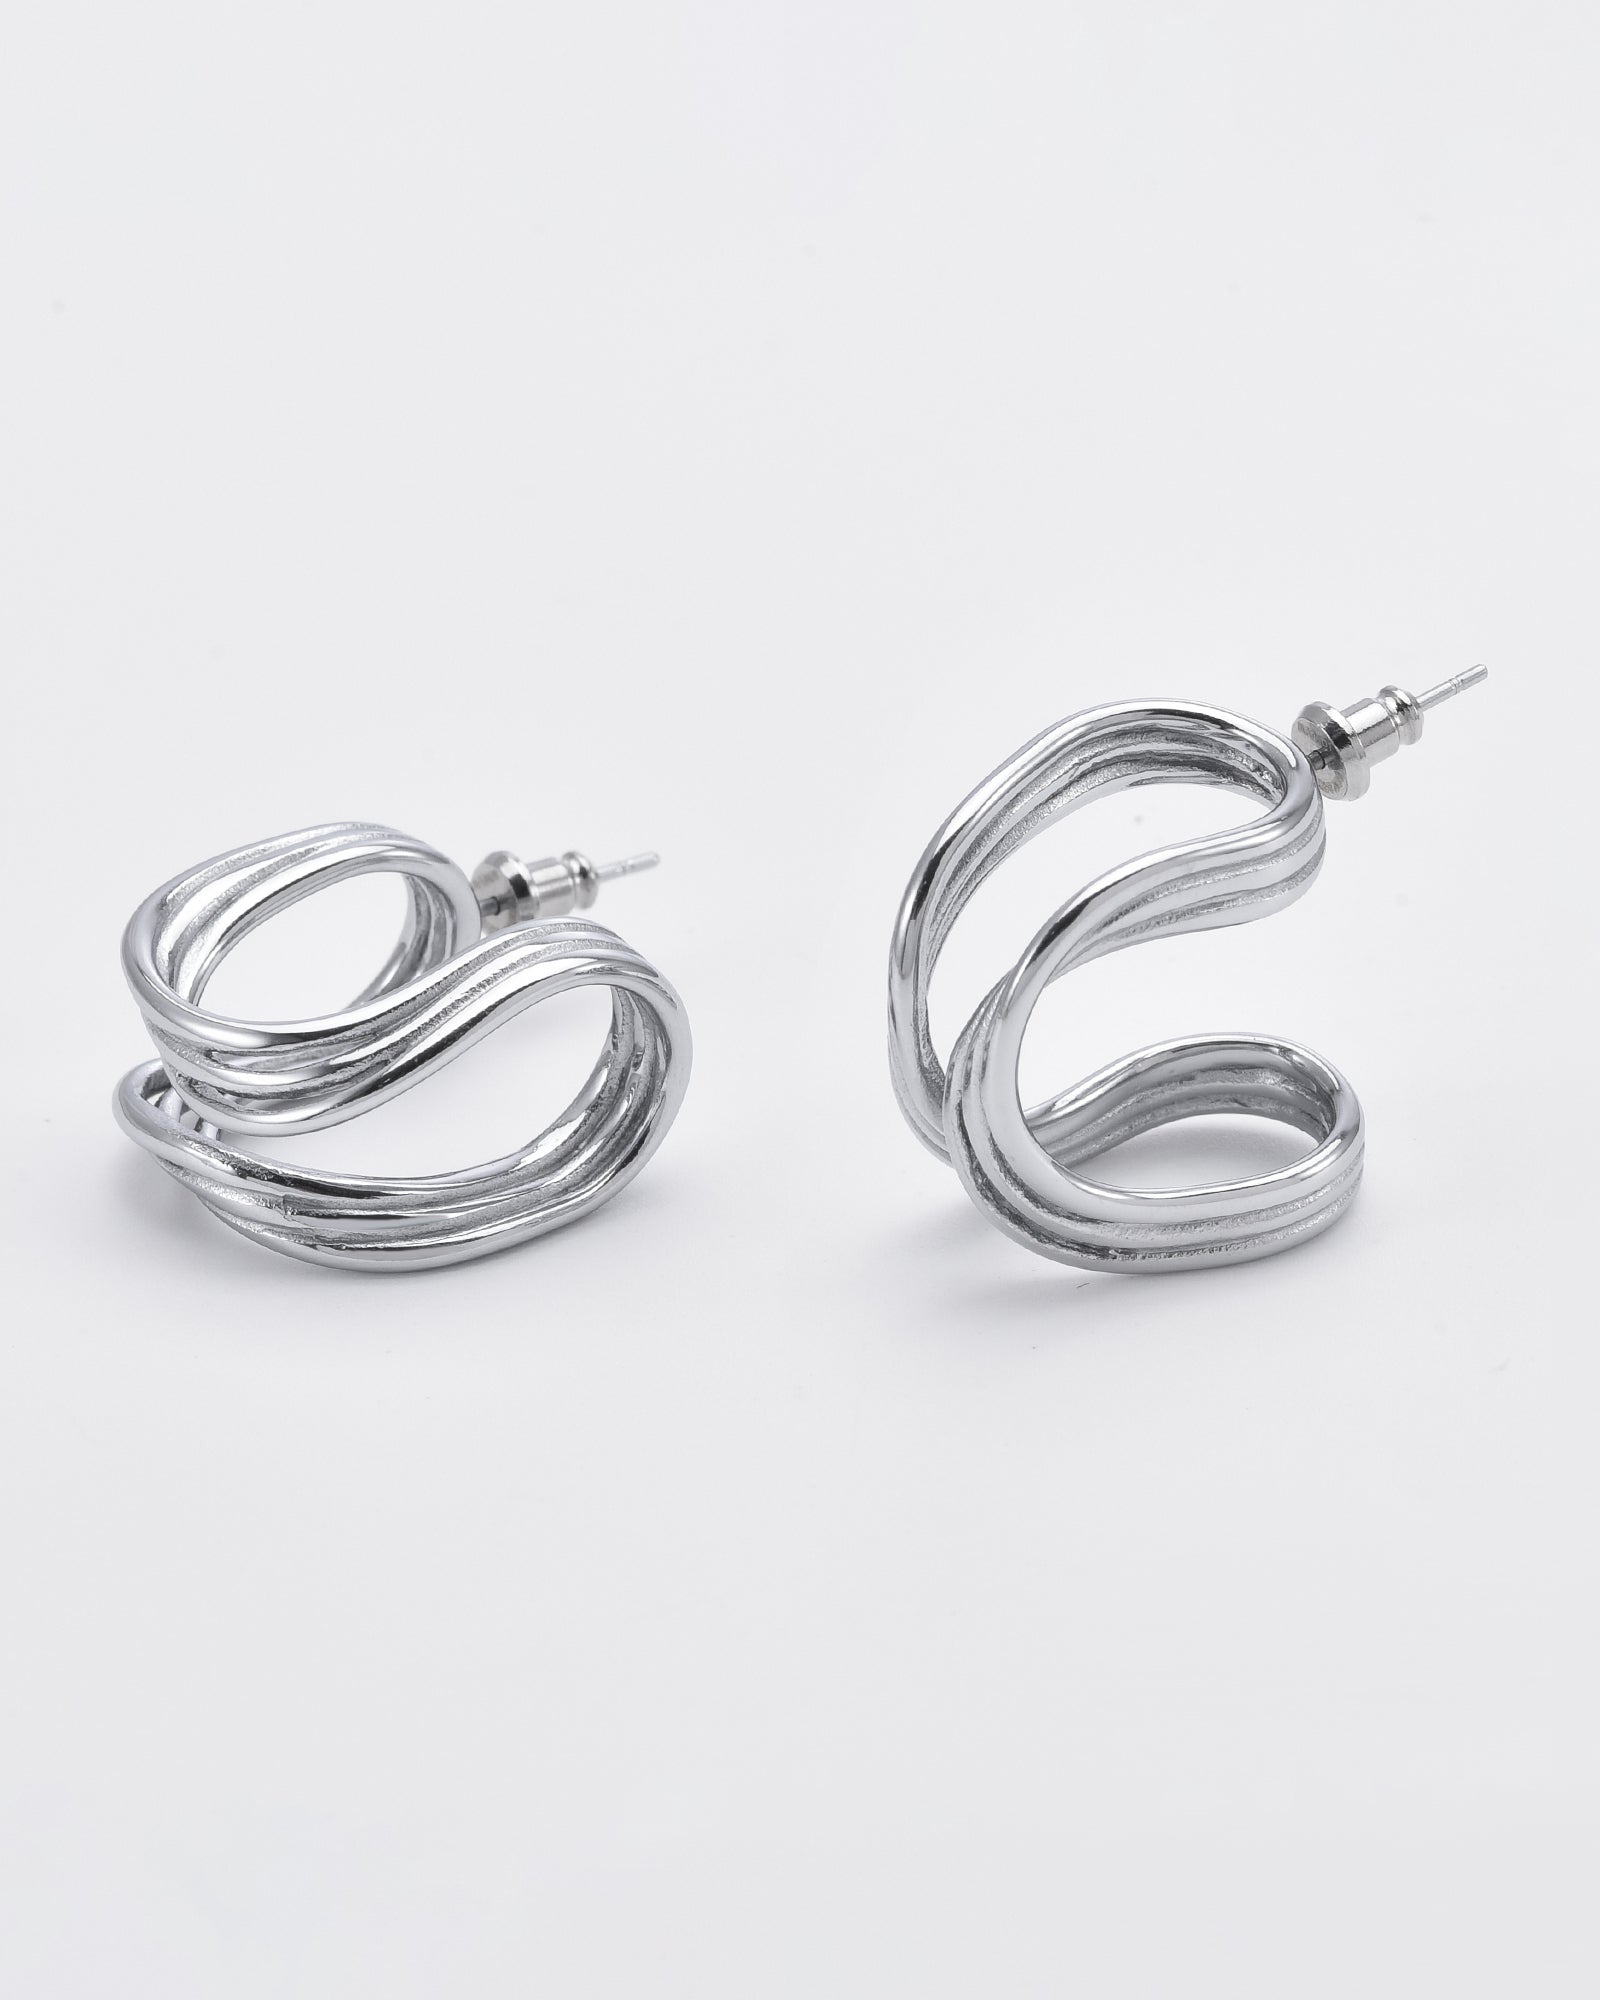 A pair of modern silver earrings with a looping, abstract design. The earrings have a glossy finish and are displayed against a plain white background. Each earring consists of a continuous curved shape with an attached stud for securing to the ear, reminiscent of **Portrait Earrings Silver by For Art's Sake®**.